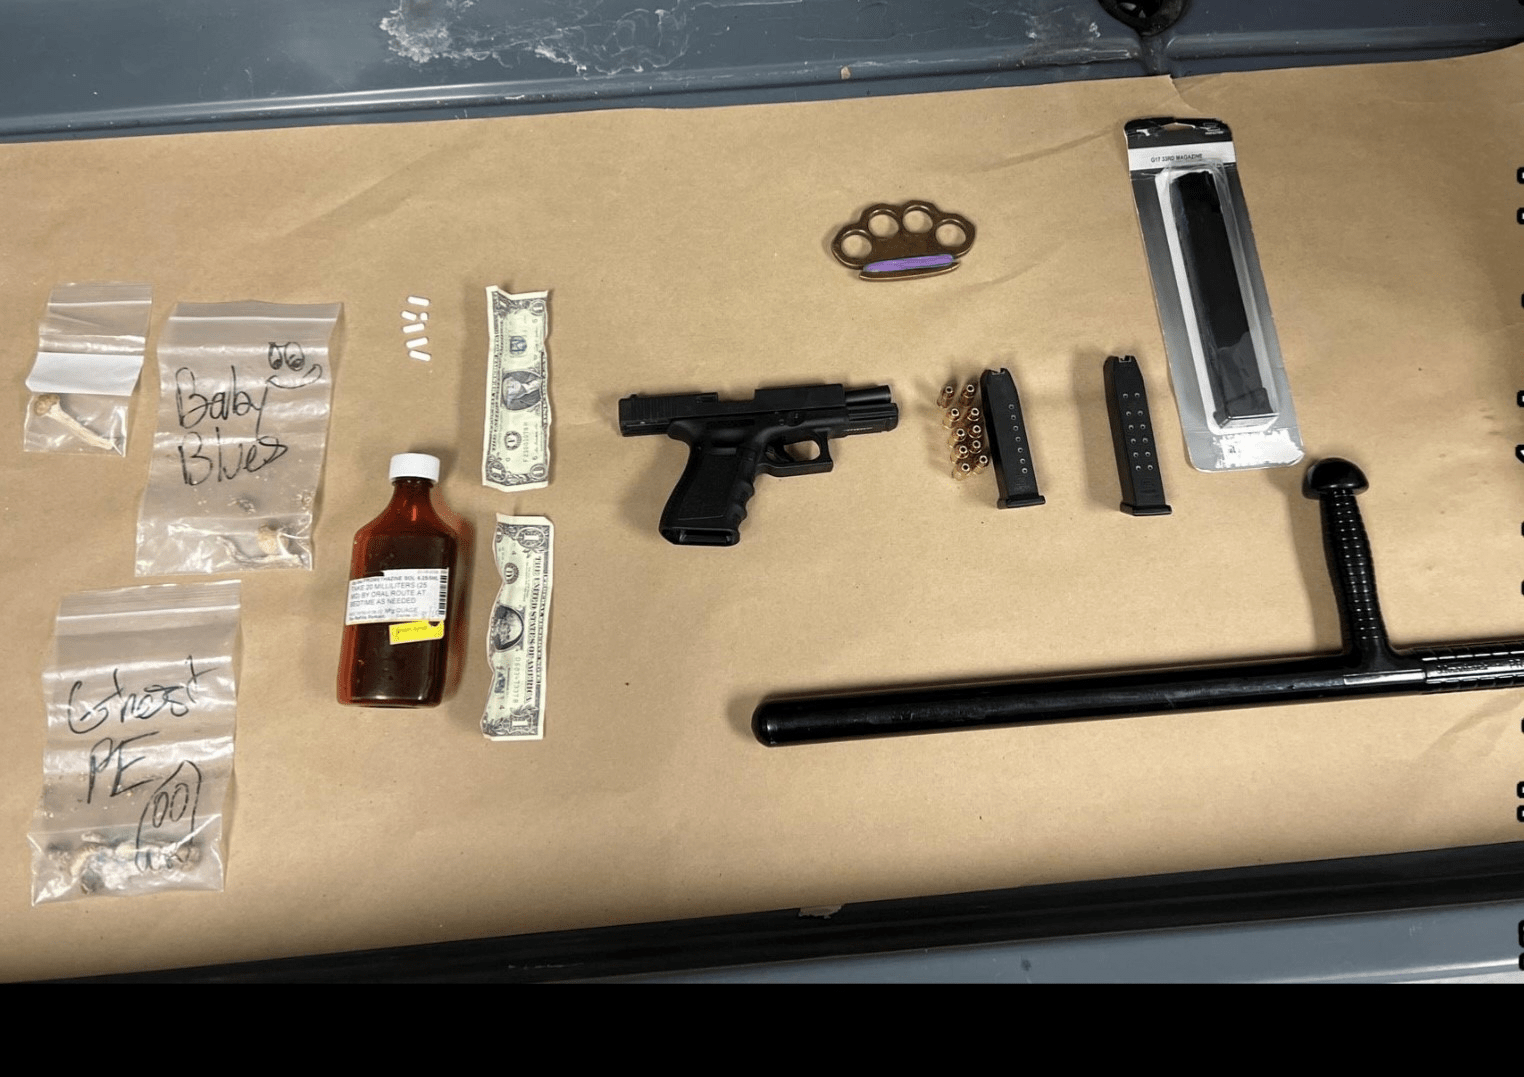 items-confiscated-on-1-20-24-rohnert-park-department-of-public-safety